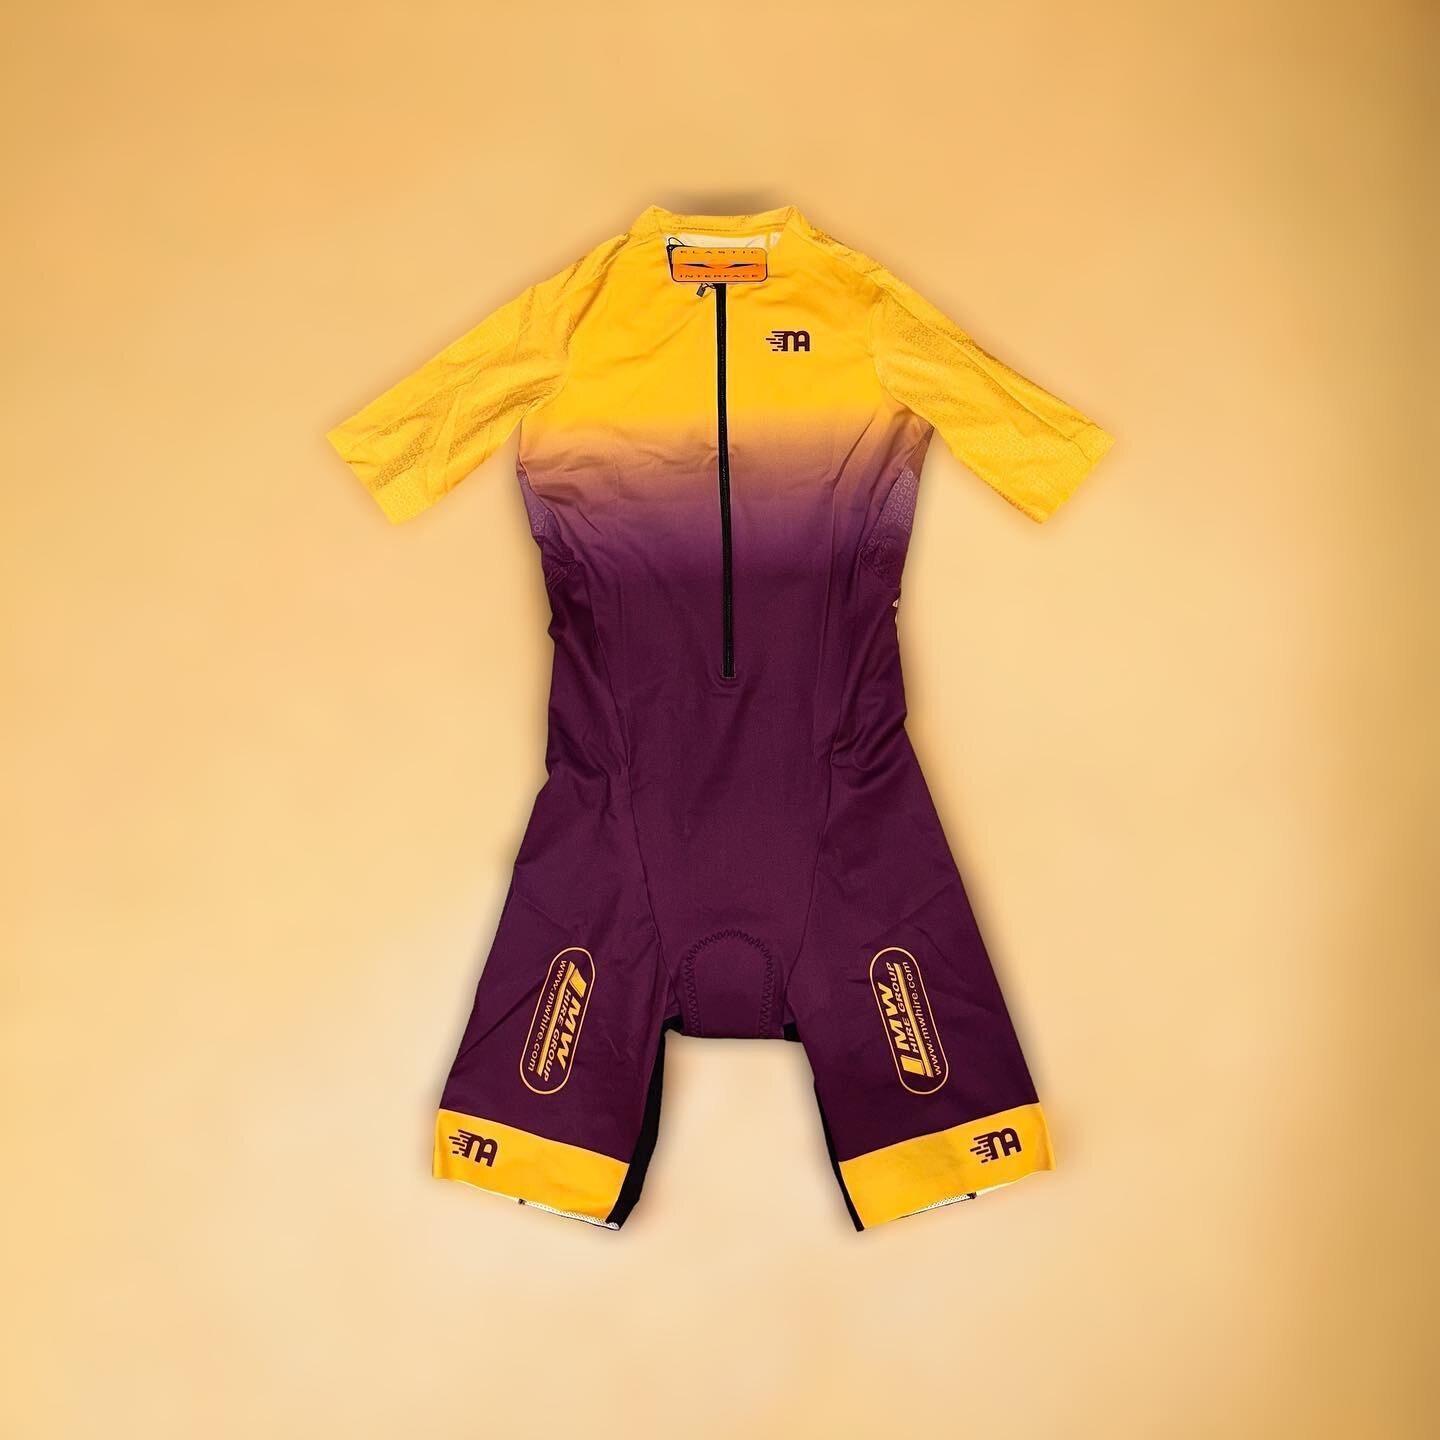 Pro Trisuits created for a group of triathletes and designed based on Wexford colours. 

Best of luck in your upcoming events!

Interested in a 1 piece Skinsuit or Trisuit? Email: info@getmoreaero.com